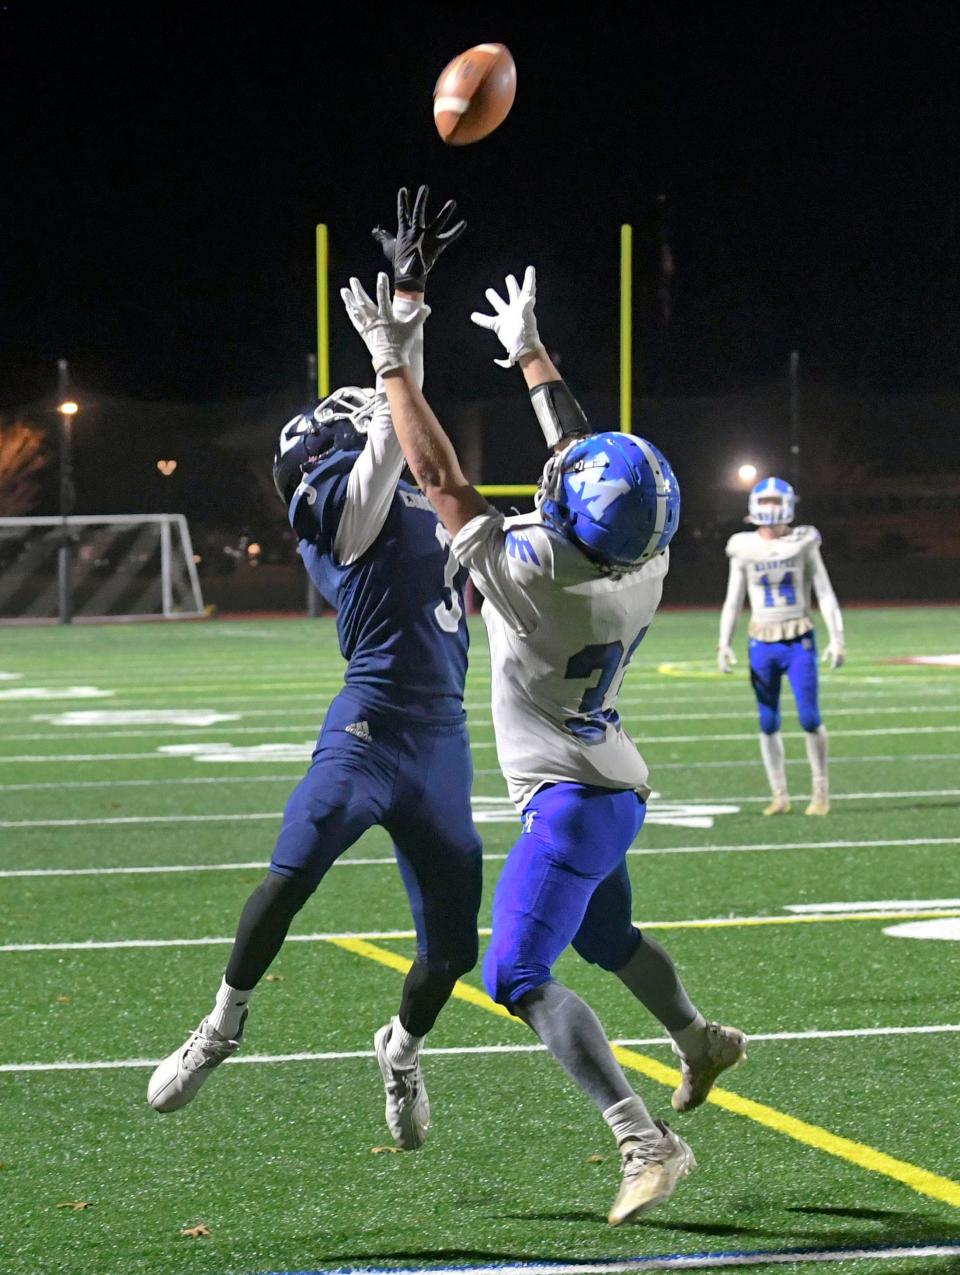 Kayden Eaton, of Mashpee, and Thomas Hansen, of Cohasset, reach for a Mashpee pass at the end of the first half in the Division 7 state semifinal football game in Carver on Nov. 19, 2021.  The pass fell incomplete.